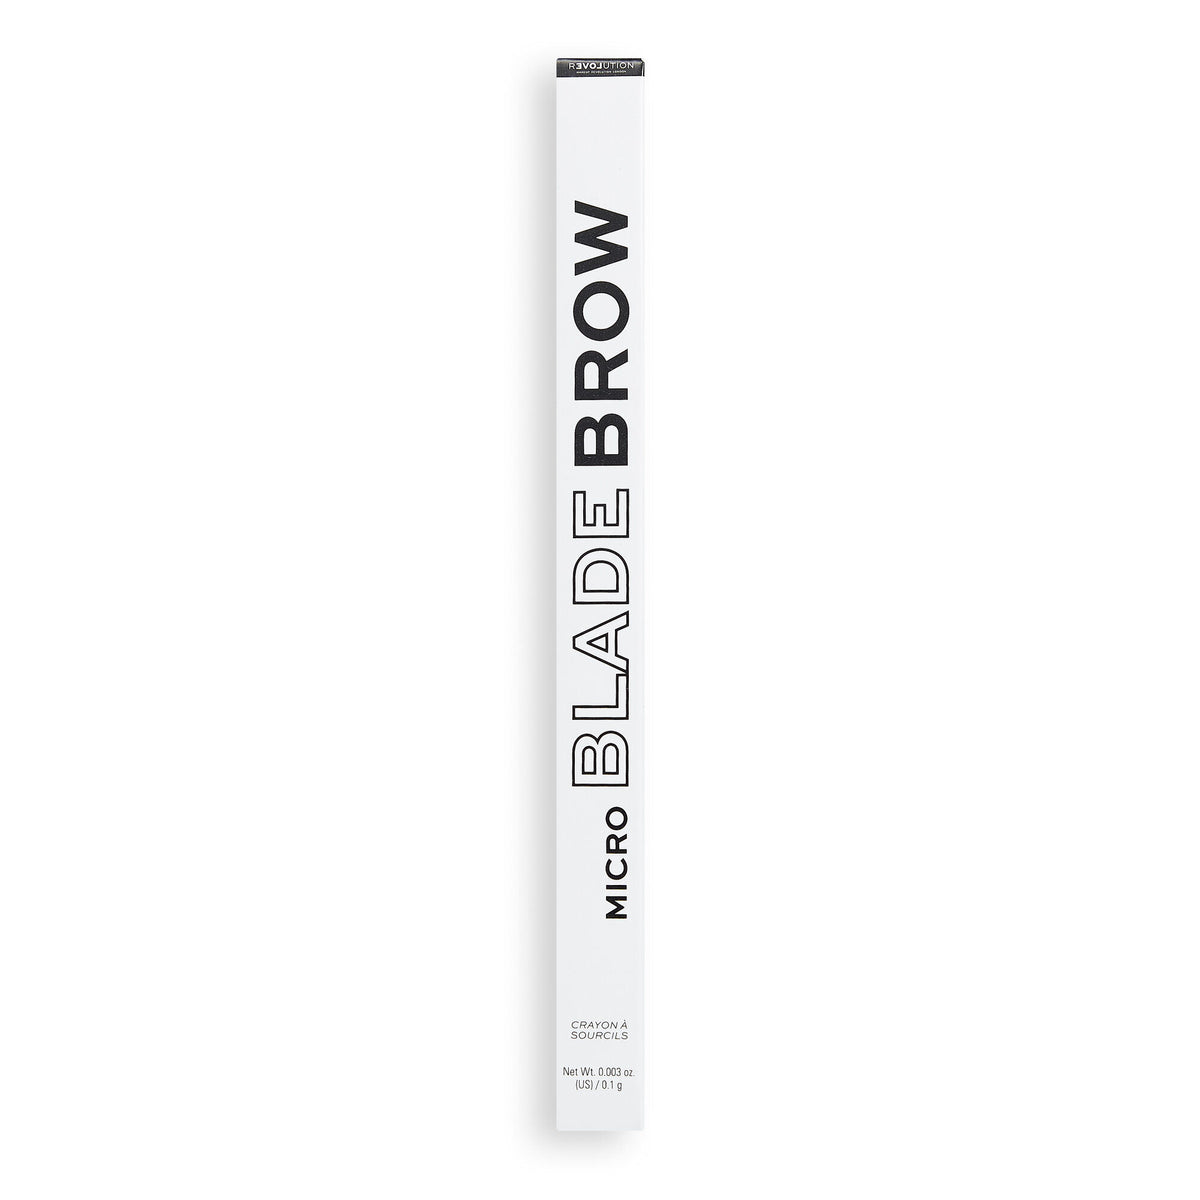 Relove By Revolution Blade Brow Pencil Brown